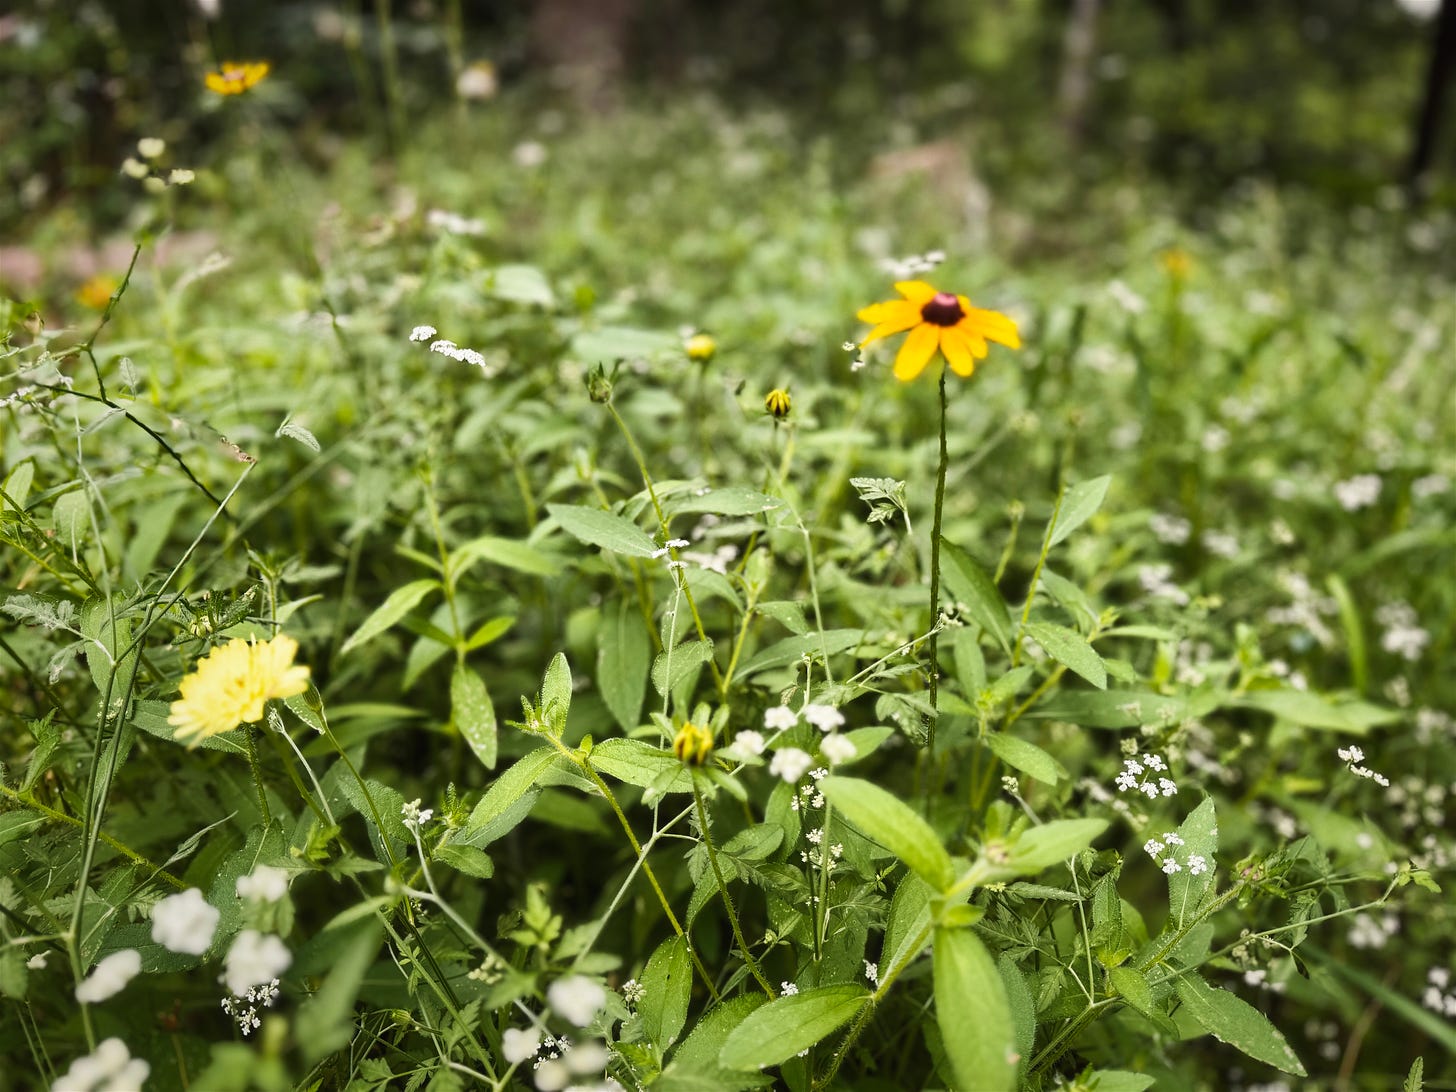 Small white flowers, a larger yellow flower, and a taller golden flower with a brown center stand out in an expense of green plants in a field.